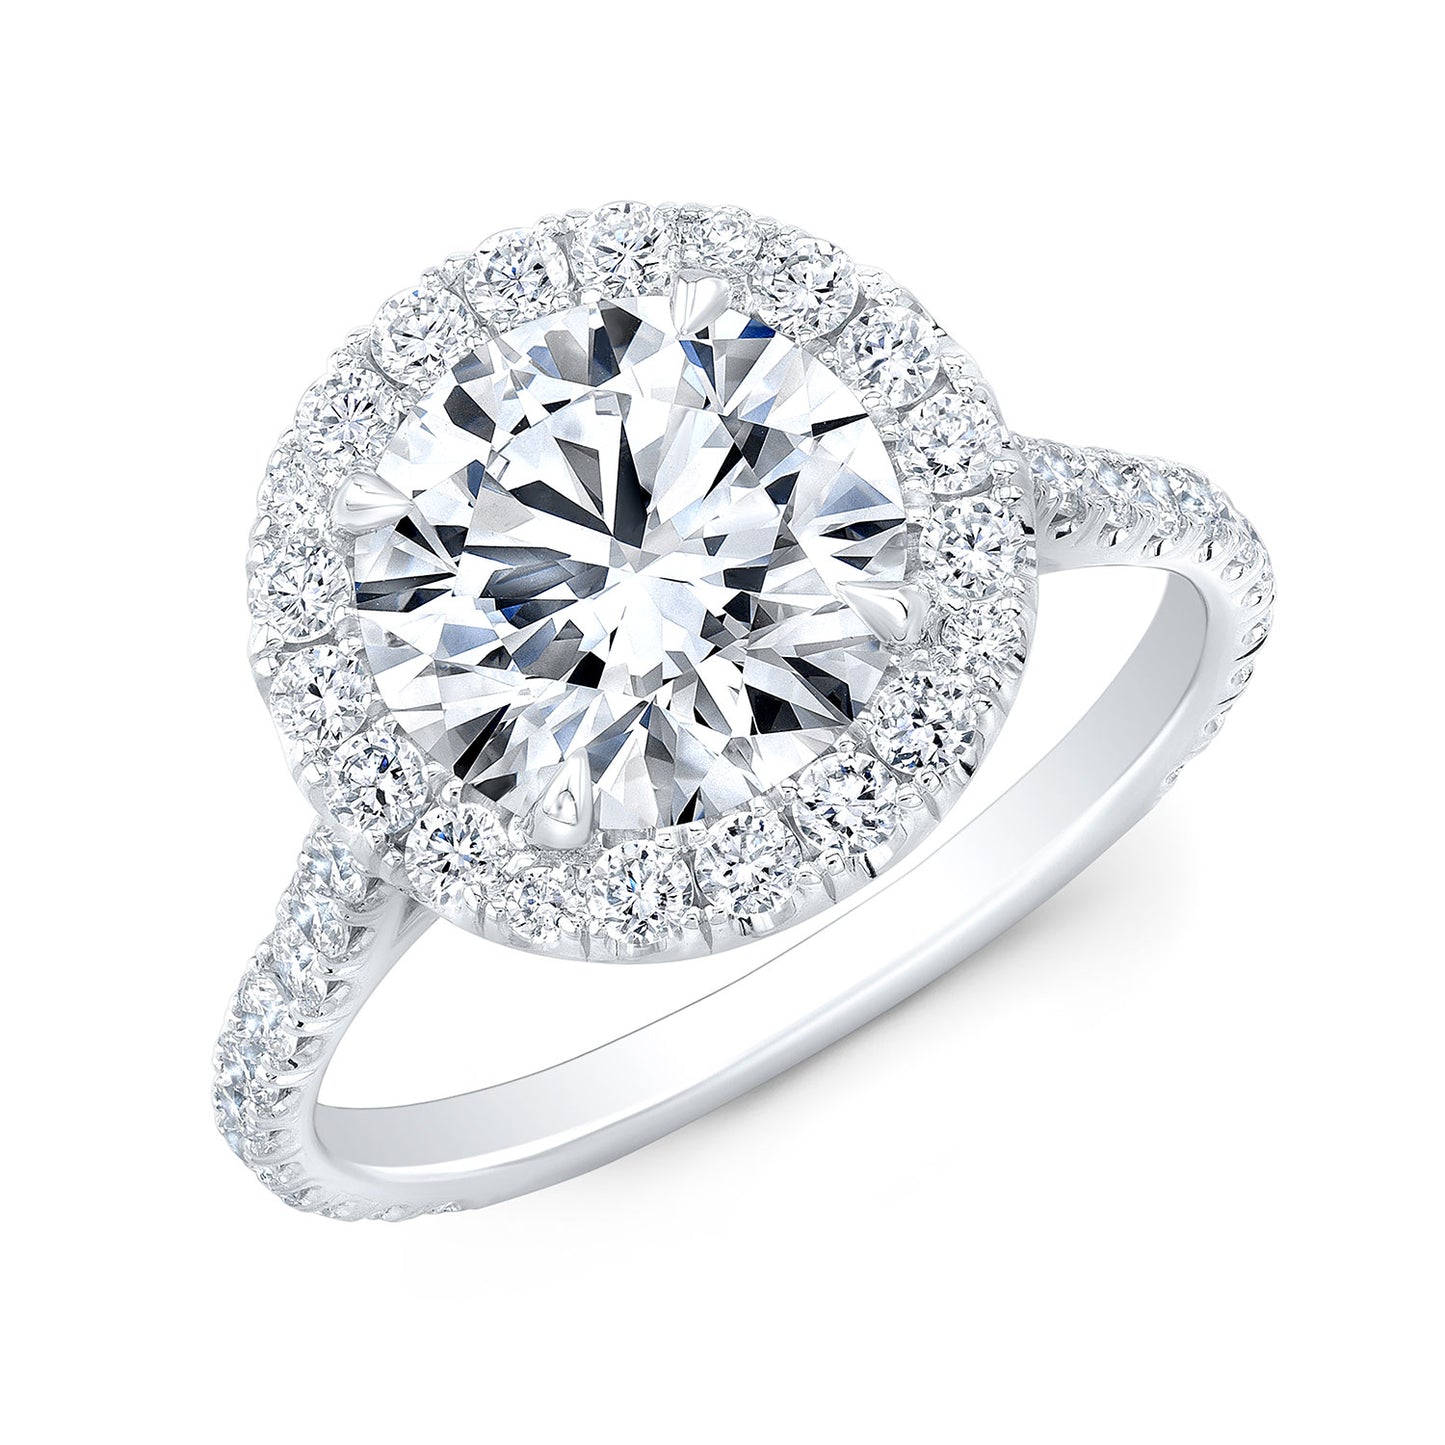 Halo Engagement Ring with Pave-Set Diamond